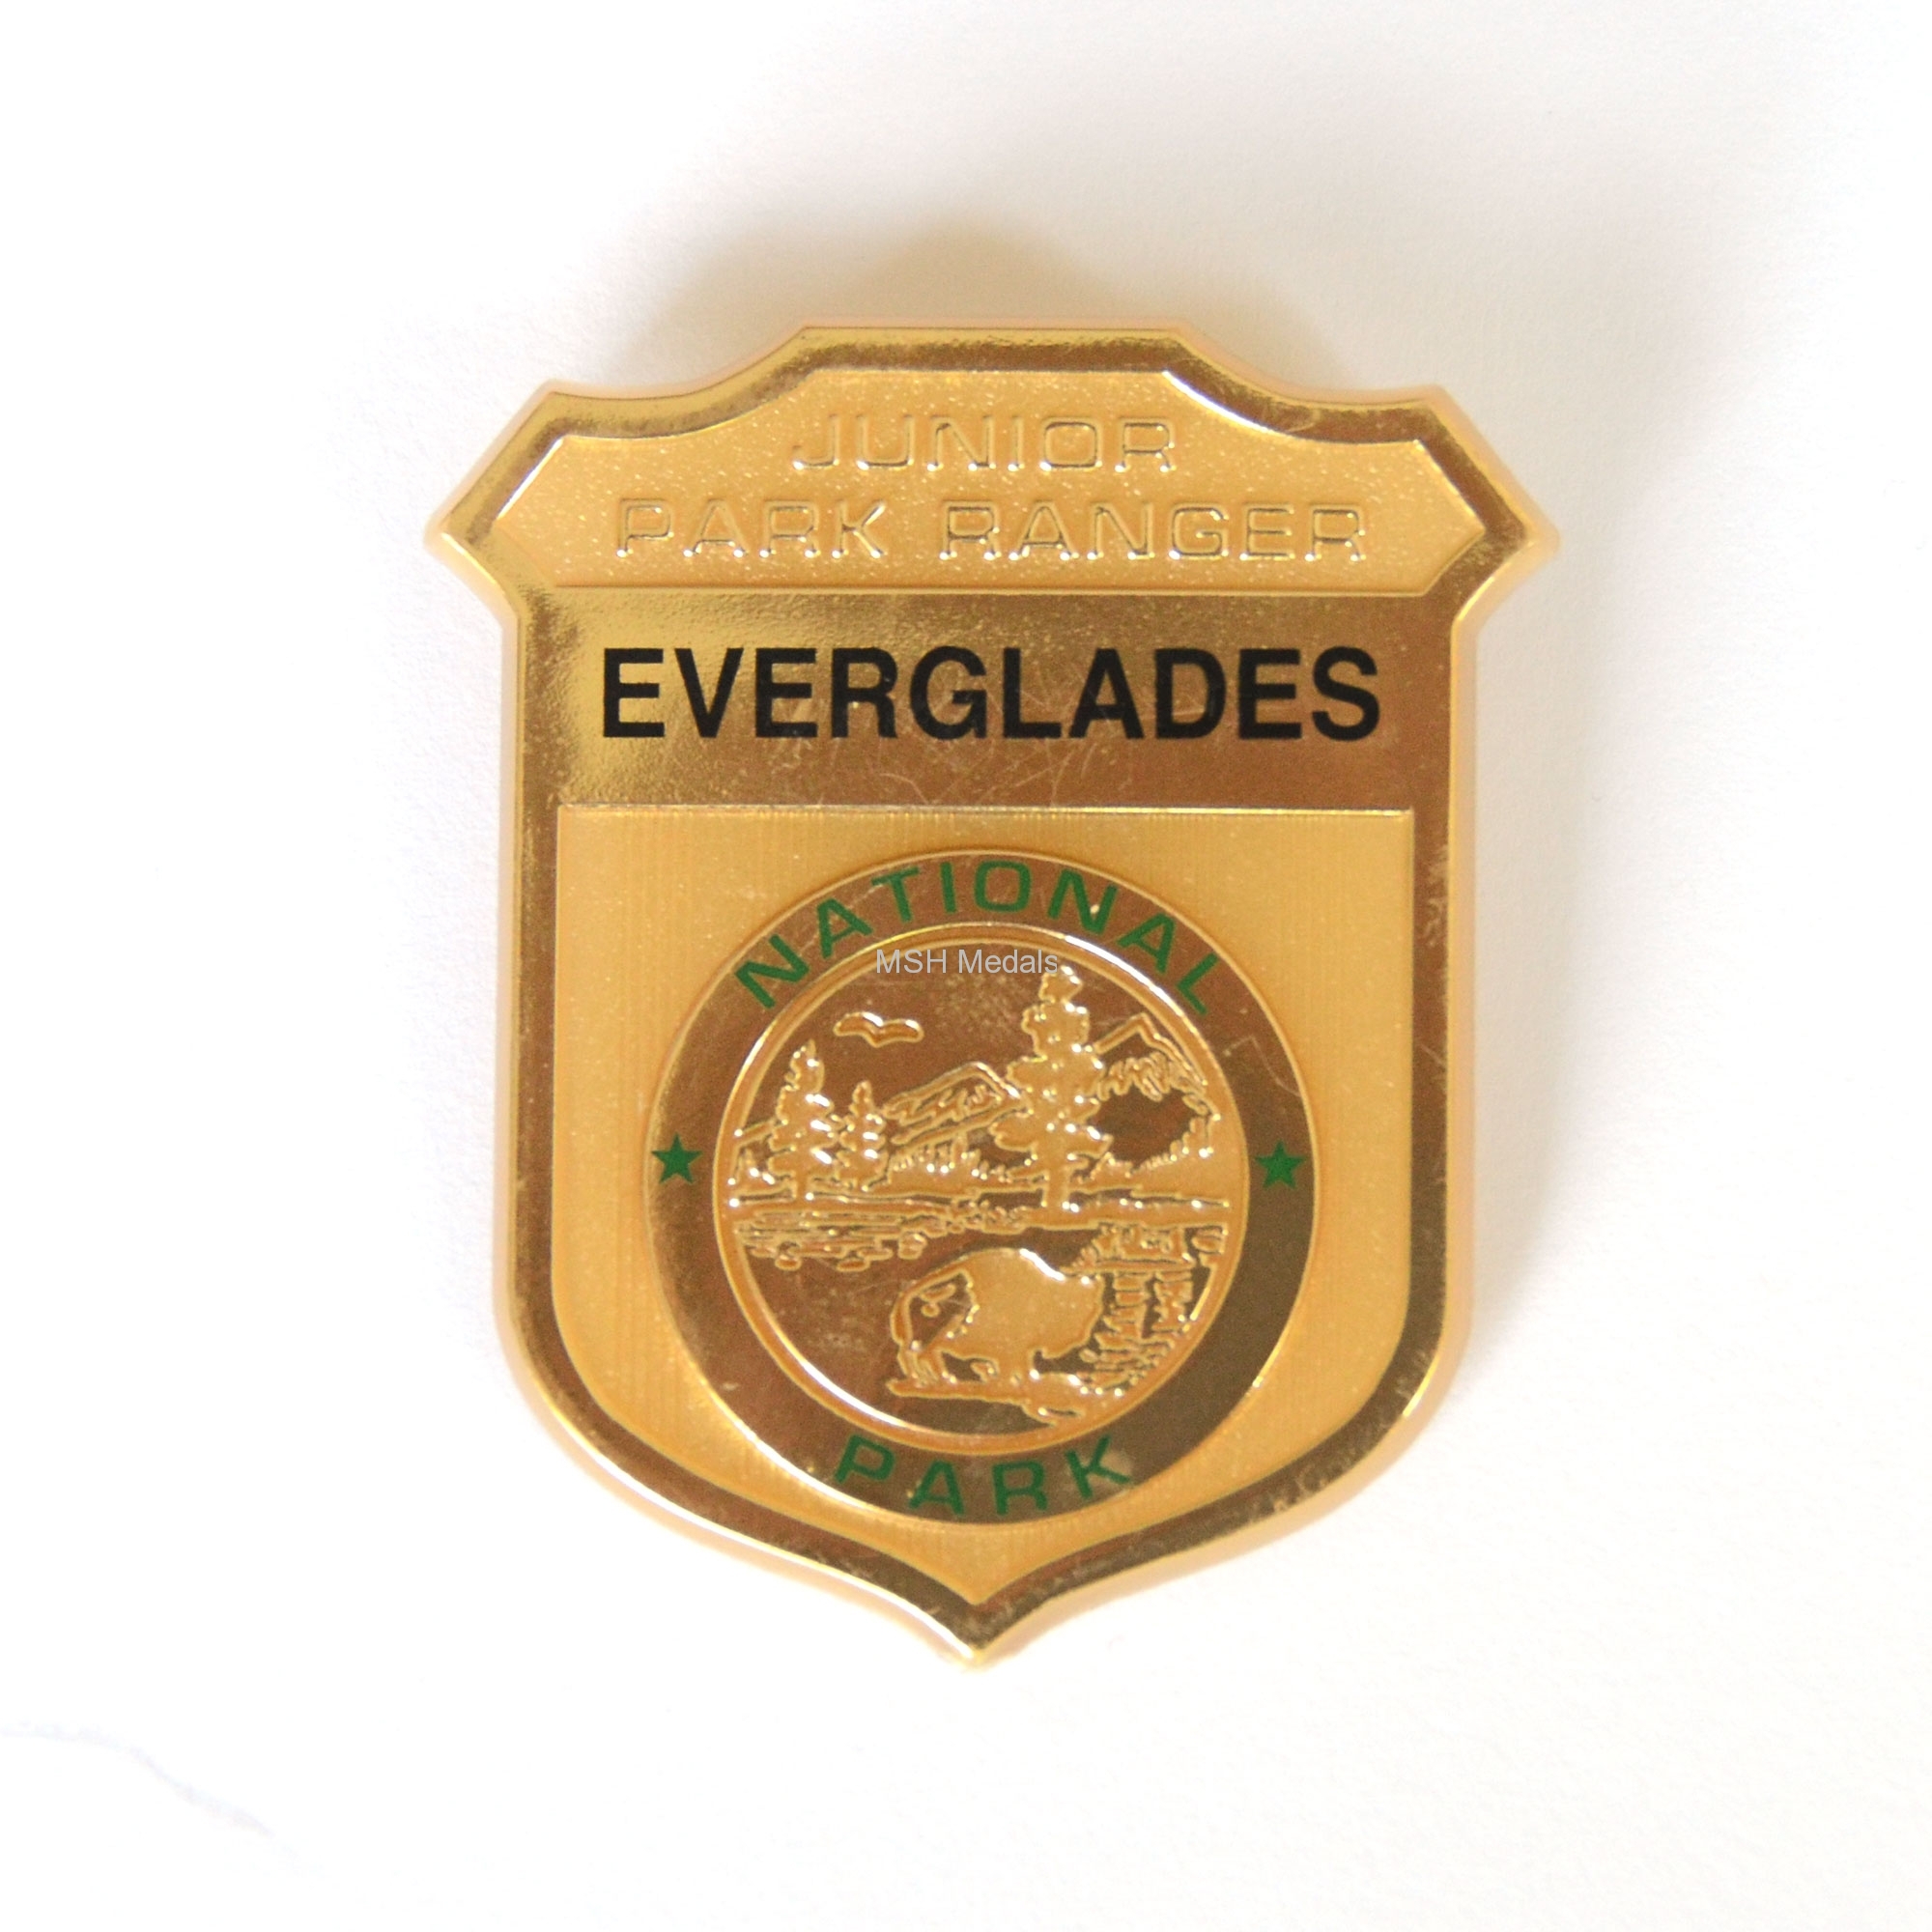 Plastic badge with pin back